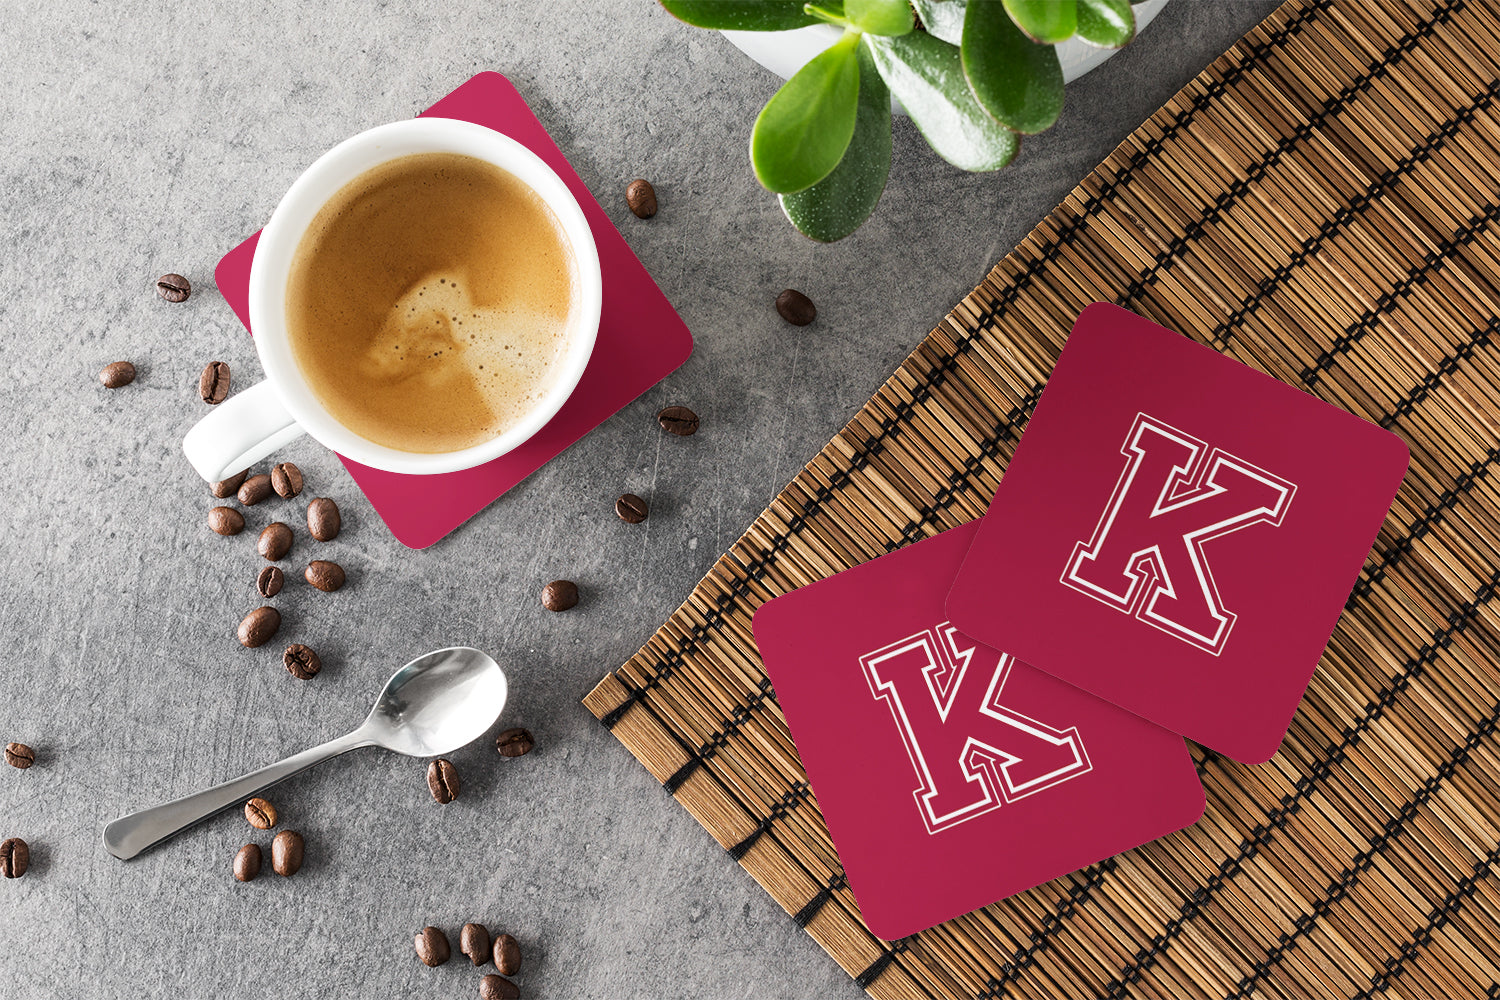 Set of 4 Monogram - Maroon and White Foam Coasters Initial Letter K - the-store.com